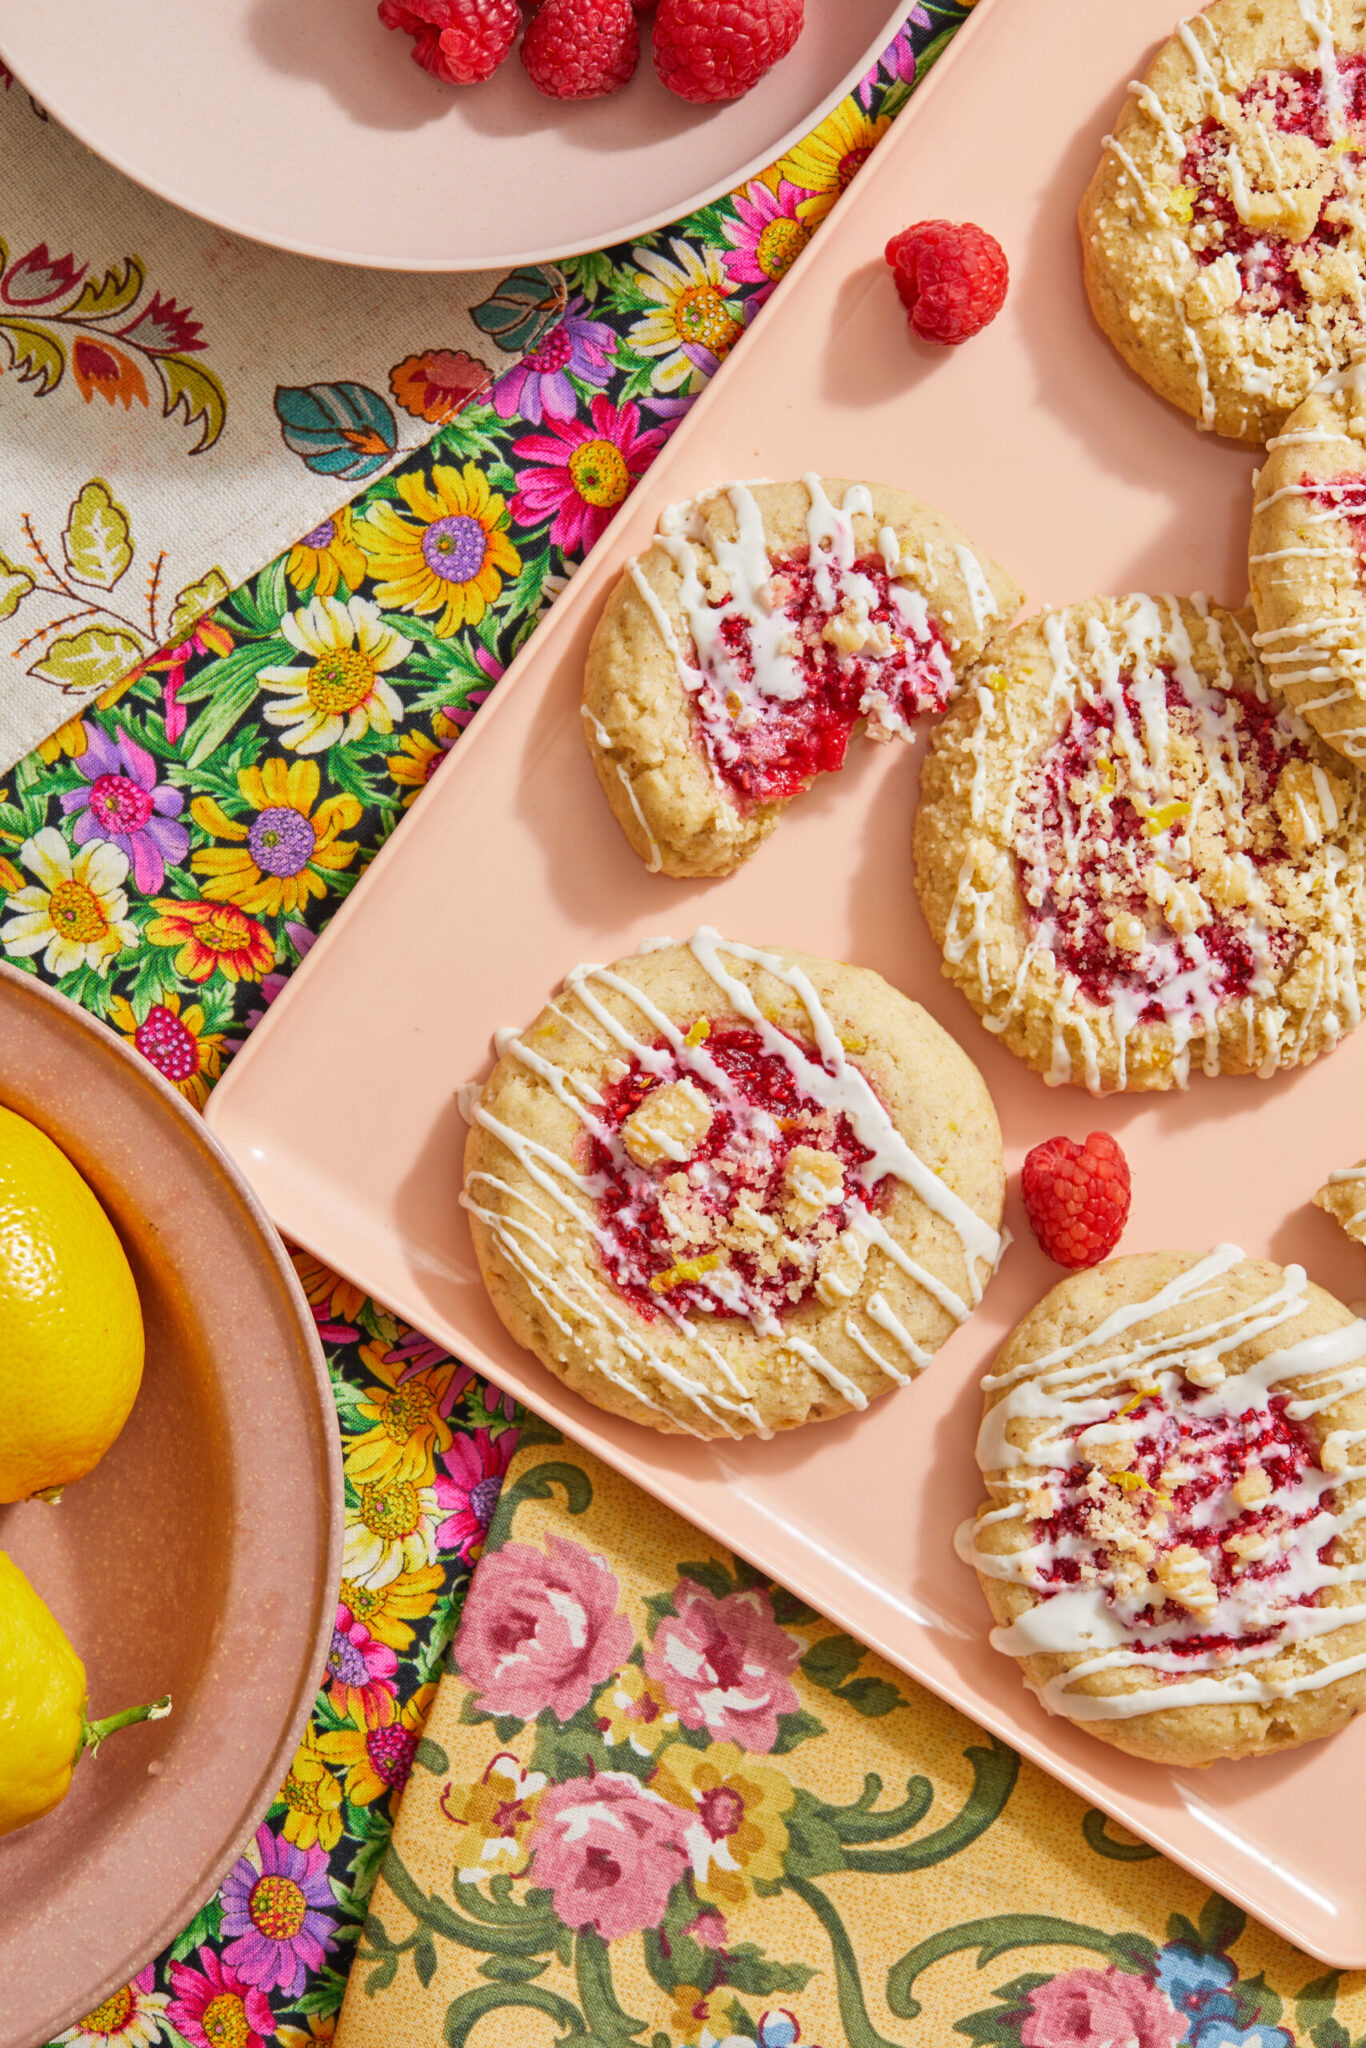 Raspberry crumble cookies on a pink backdrop